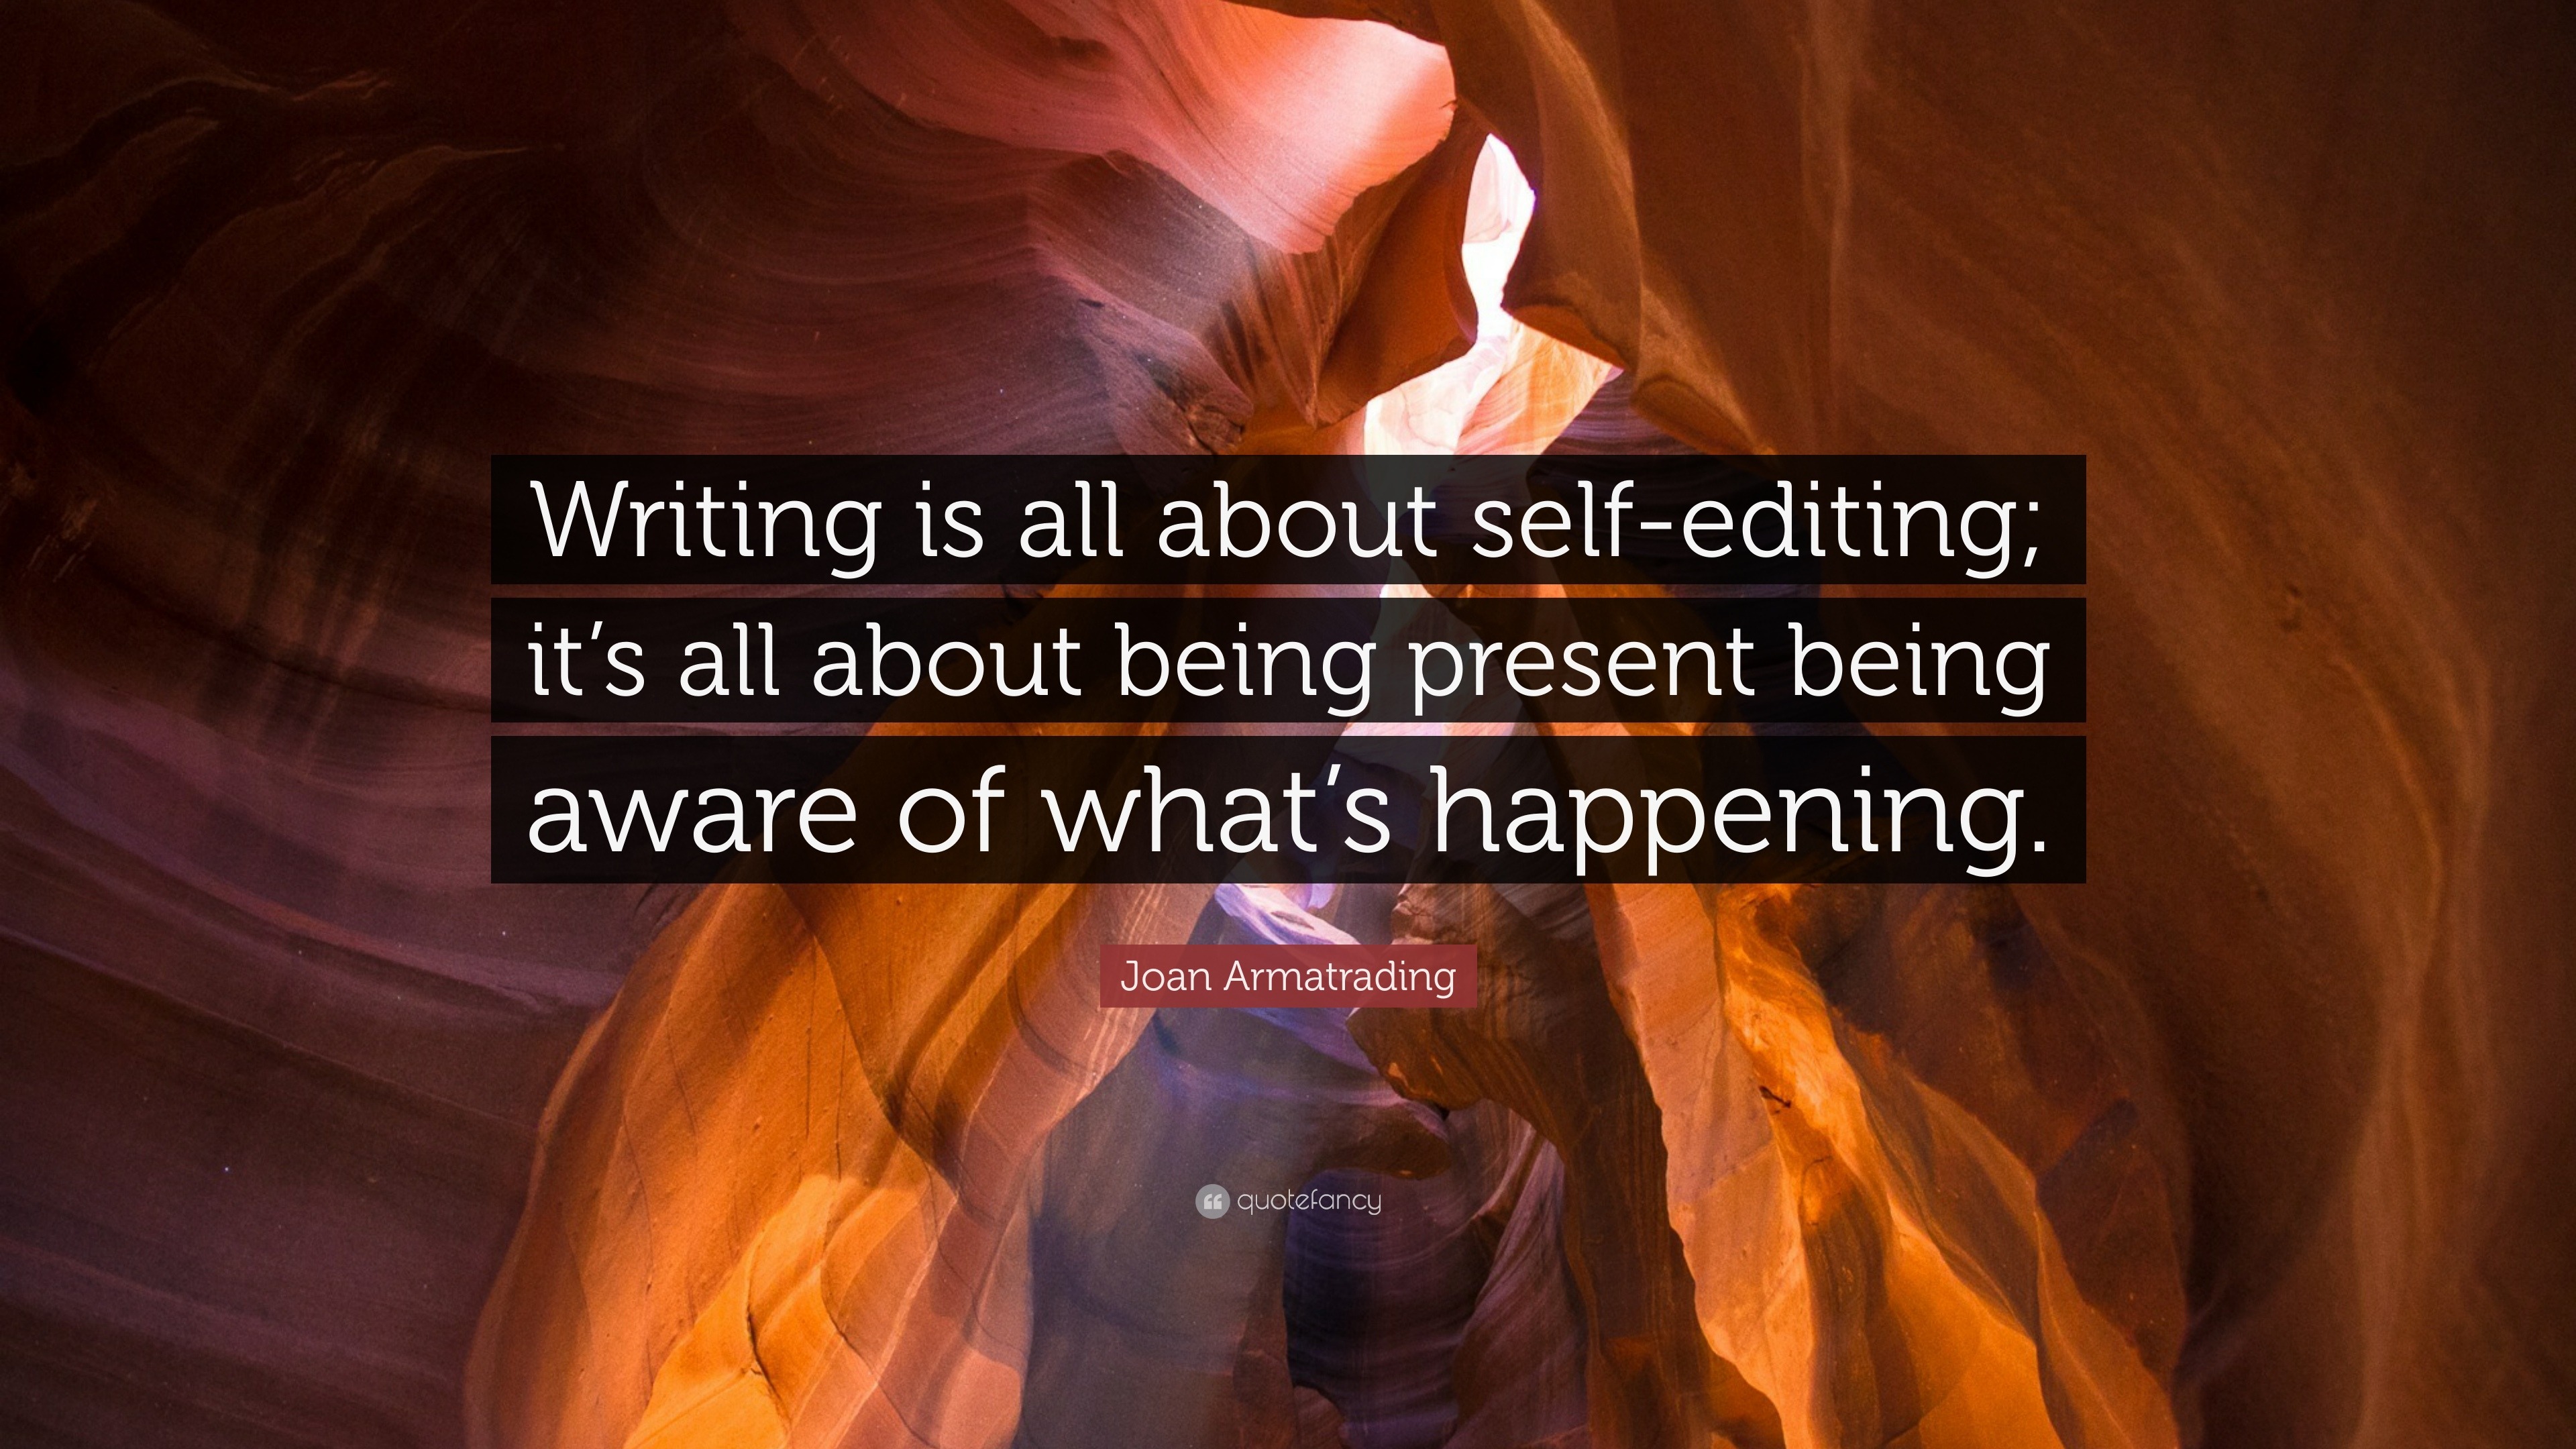 https://quotefancy.com/media/wallpaper/3840x2160/1357844-Joan-Armatrading-Quote-Writing-is-all-about-self-editing-it-s-all.jpg